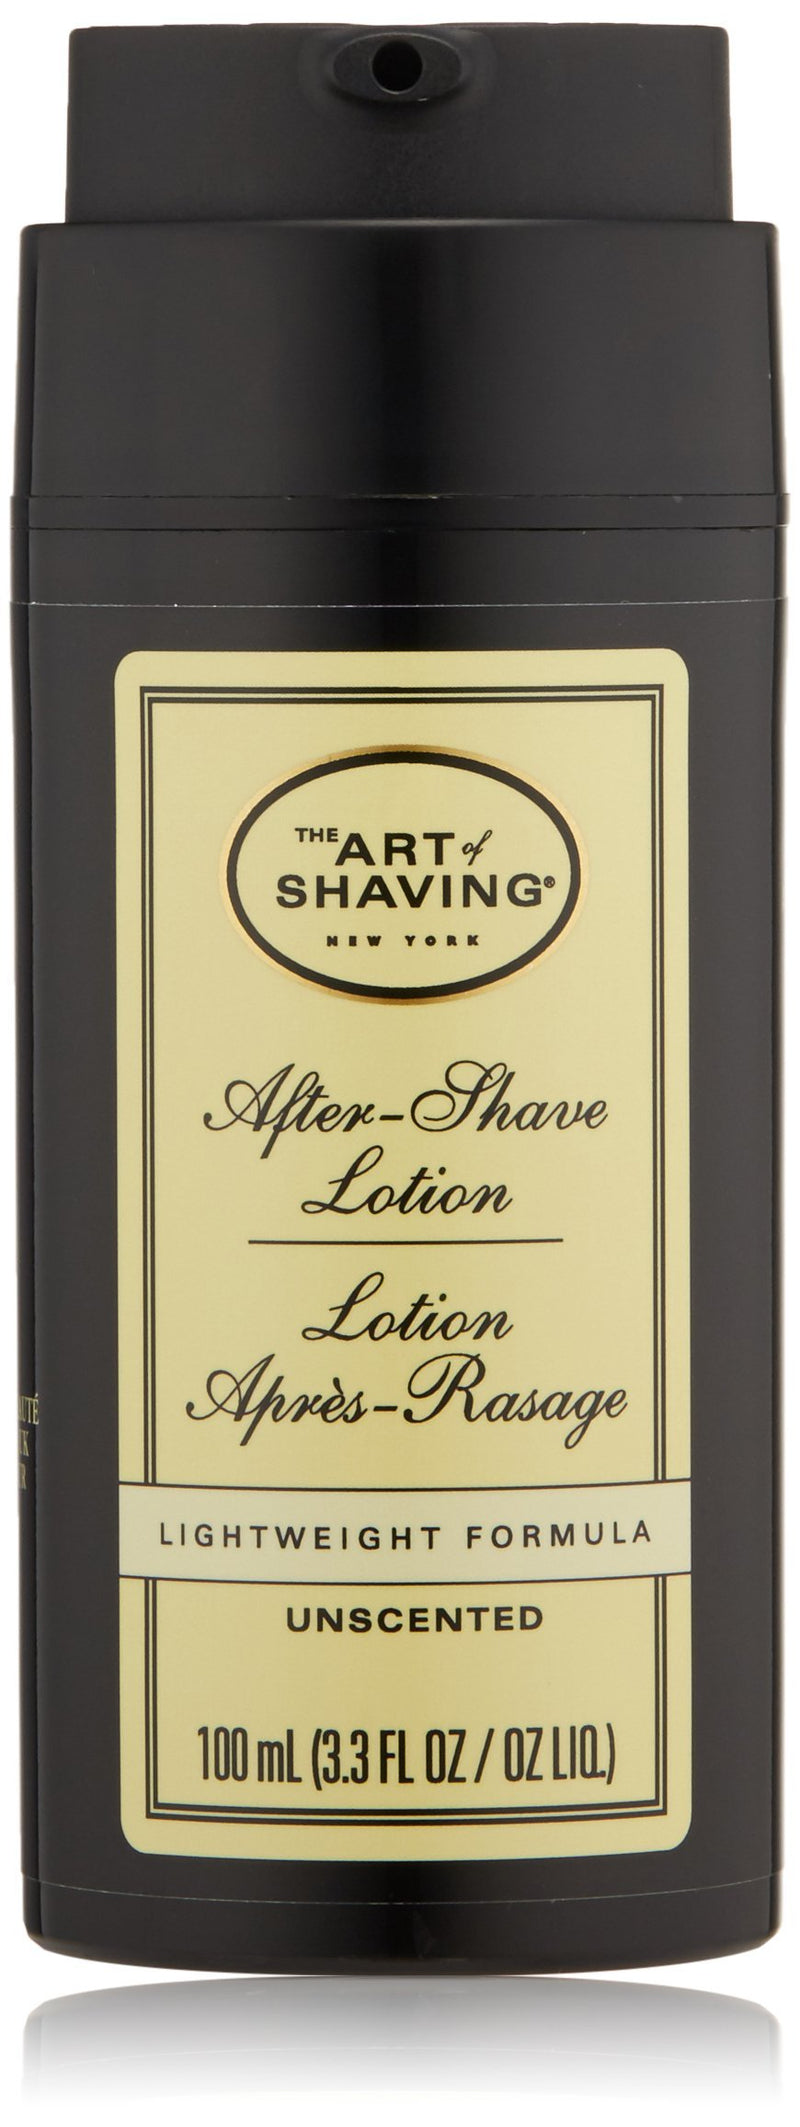 After-Shave Lotion - Unscented - 3.3 oz After-Shave Lotion